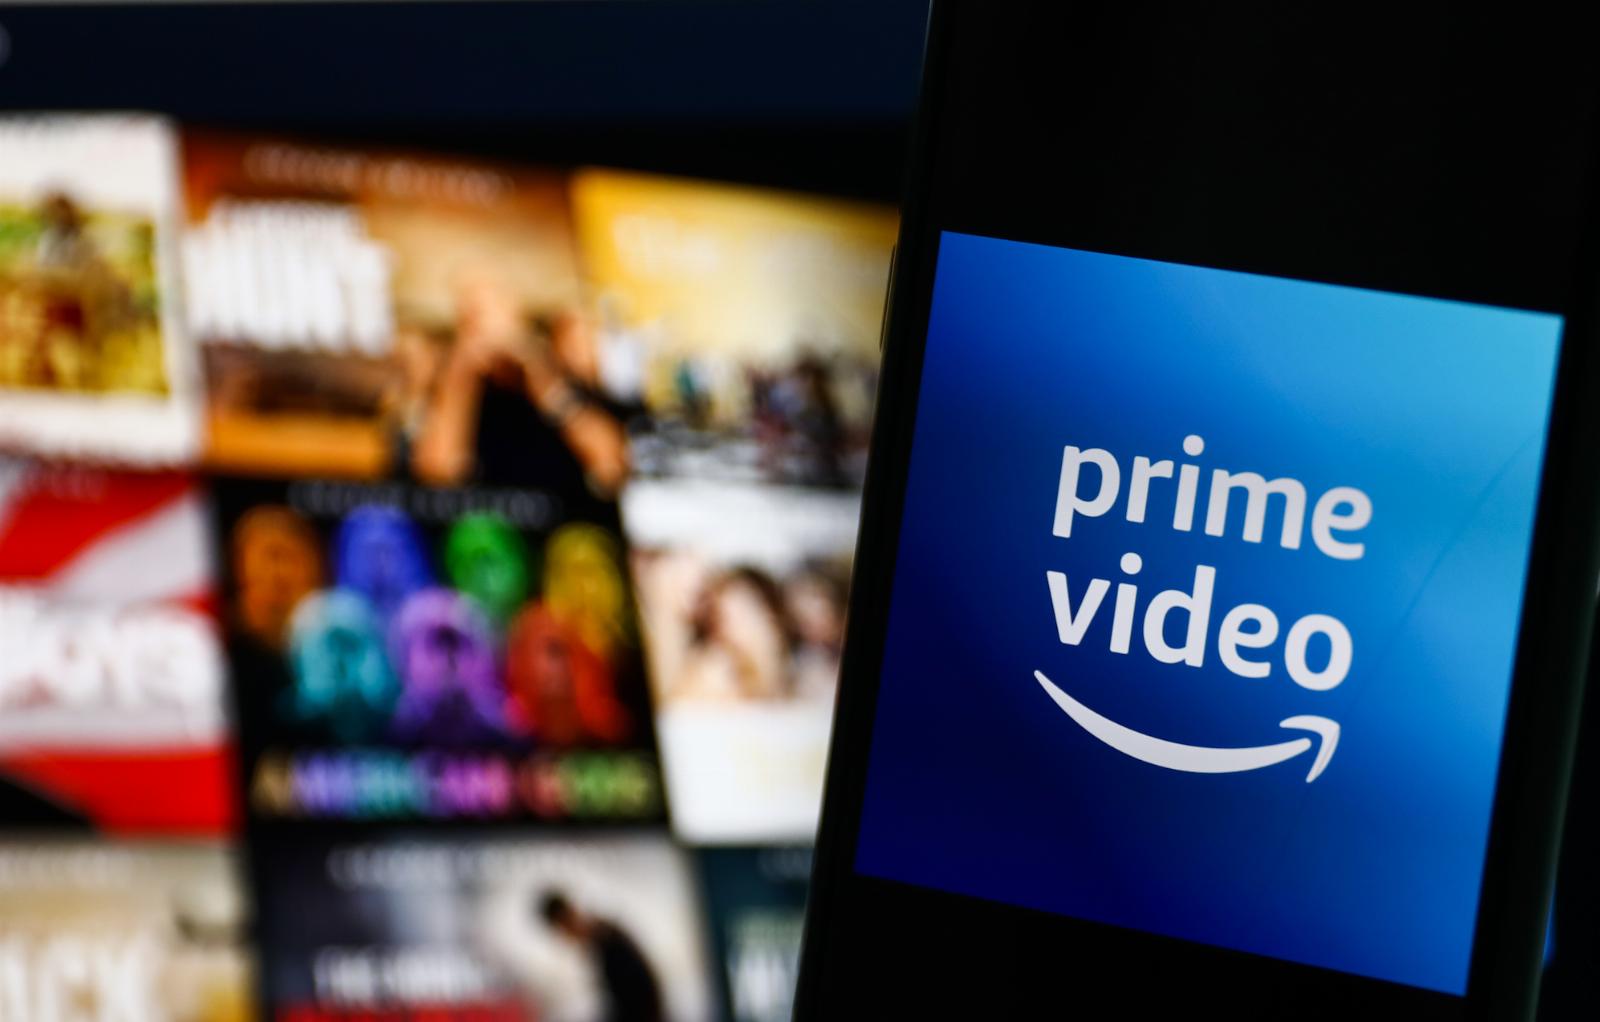 Amazon Prime Video is discontinuing support for local originals in Africa and Middle East